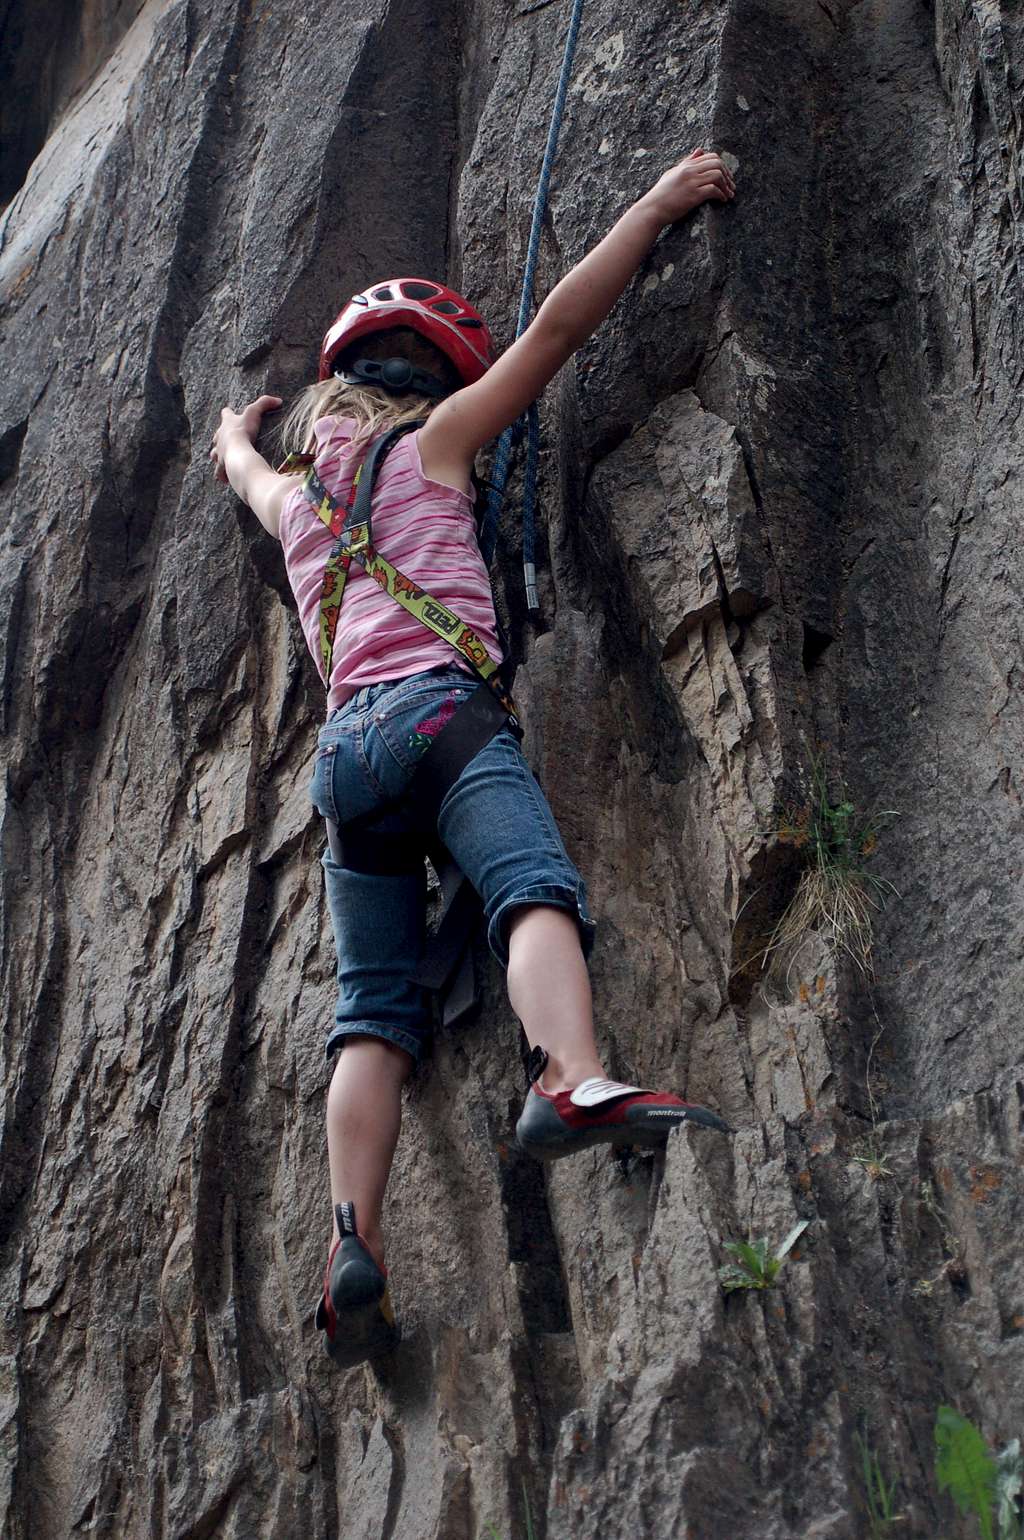 Robin (5) on a 5.10 Route